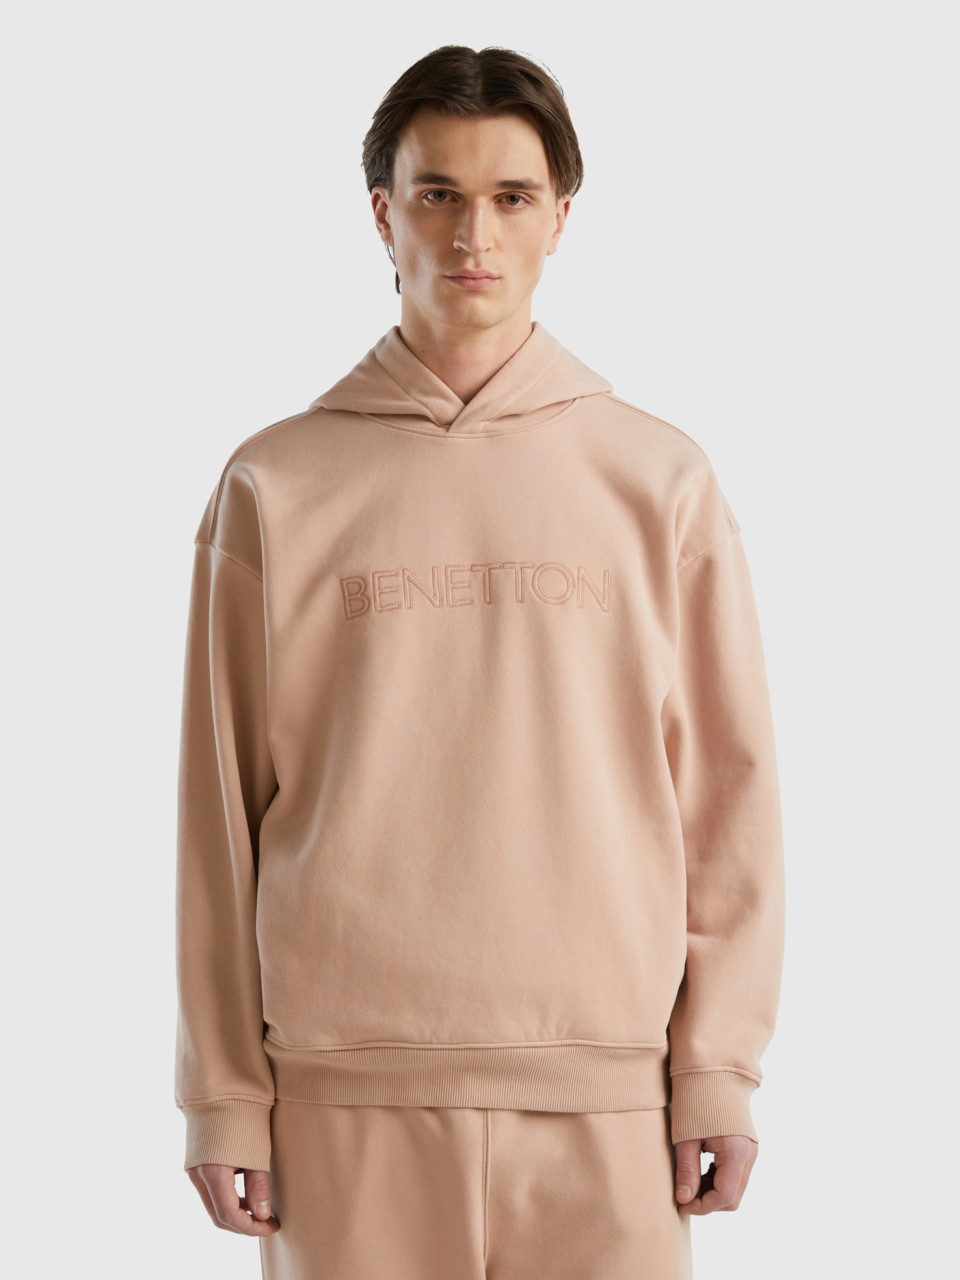 Benetton, Sweatshirt With Embroidery In Organic Cotton Blend, Nude, Men